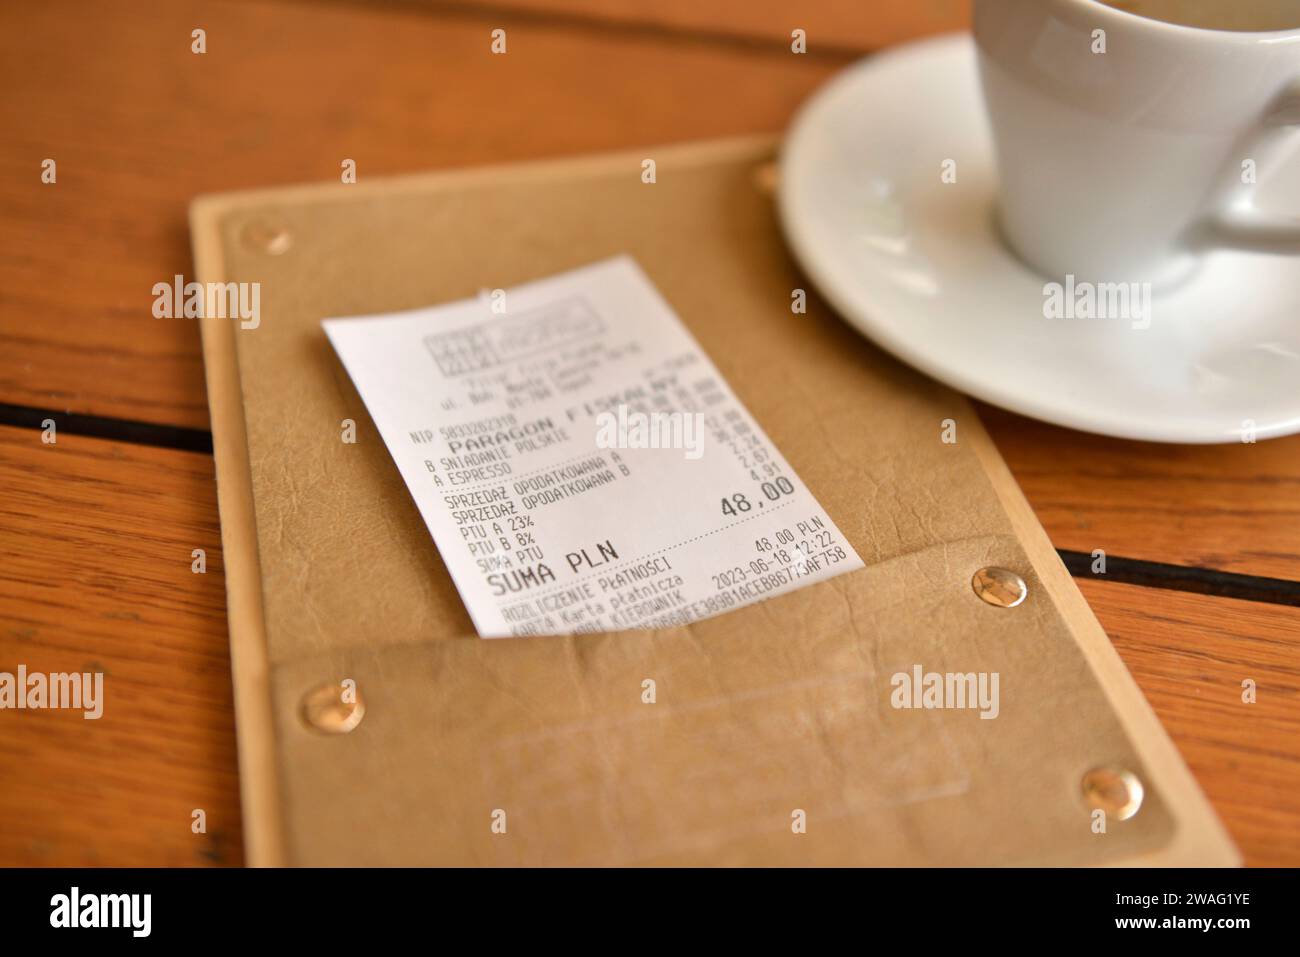 Restaurant bill, check or till receipt with the amount due in Polish złoty, Poland, Europe, EU Stock Photo